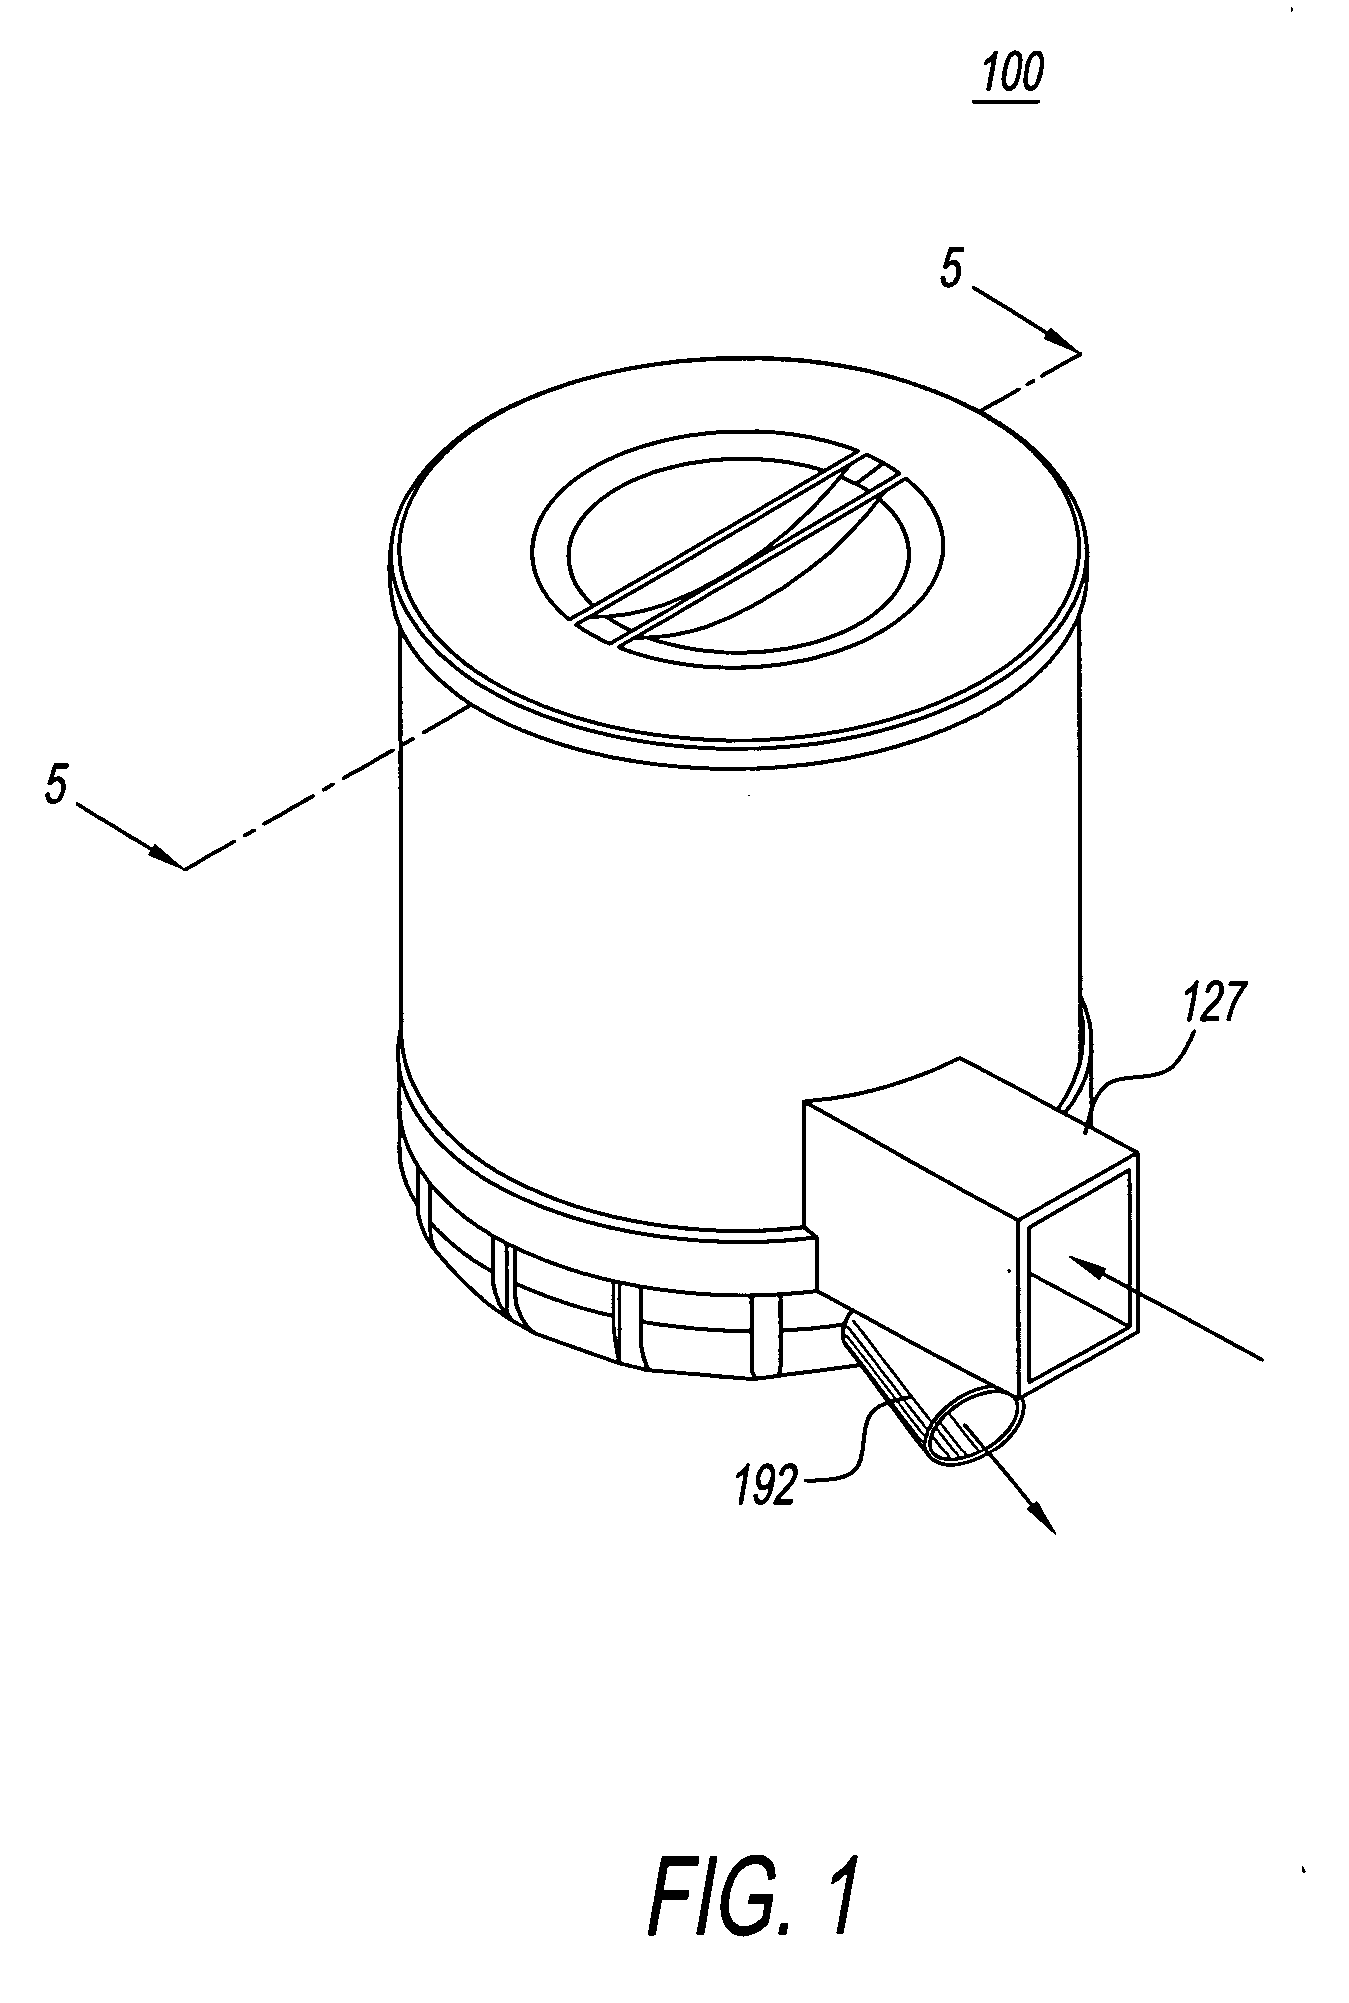 Multi-cyclone dust collection apparatus